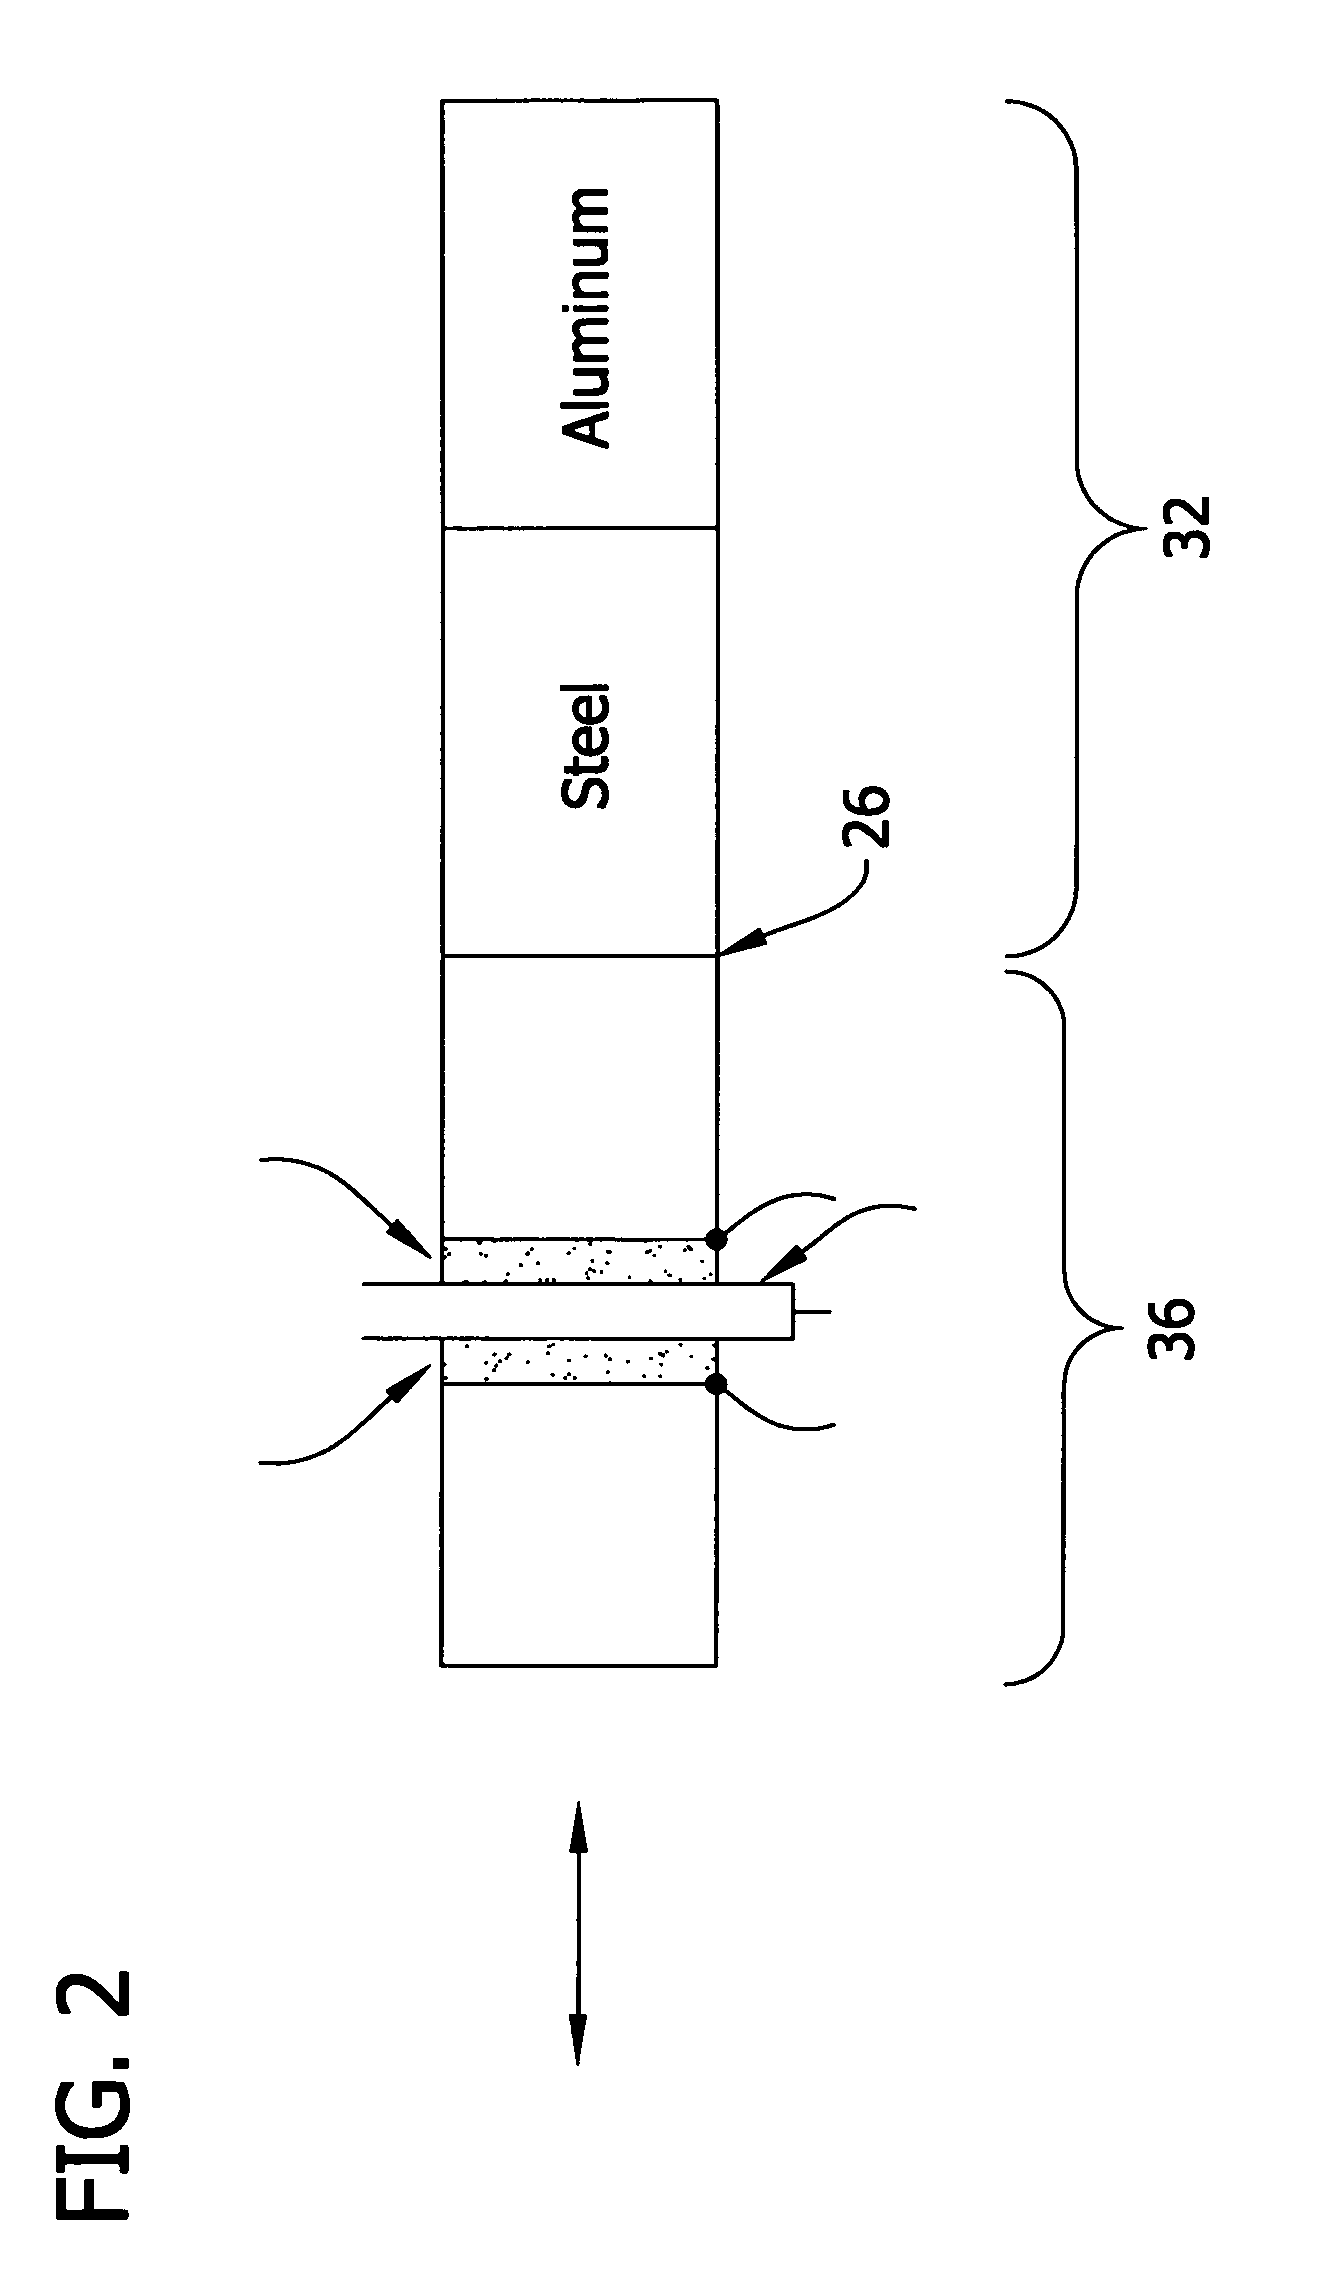 Methods for producing ultrasonic waveguides having improved amplification